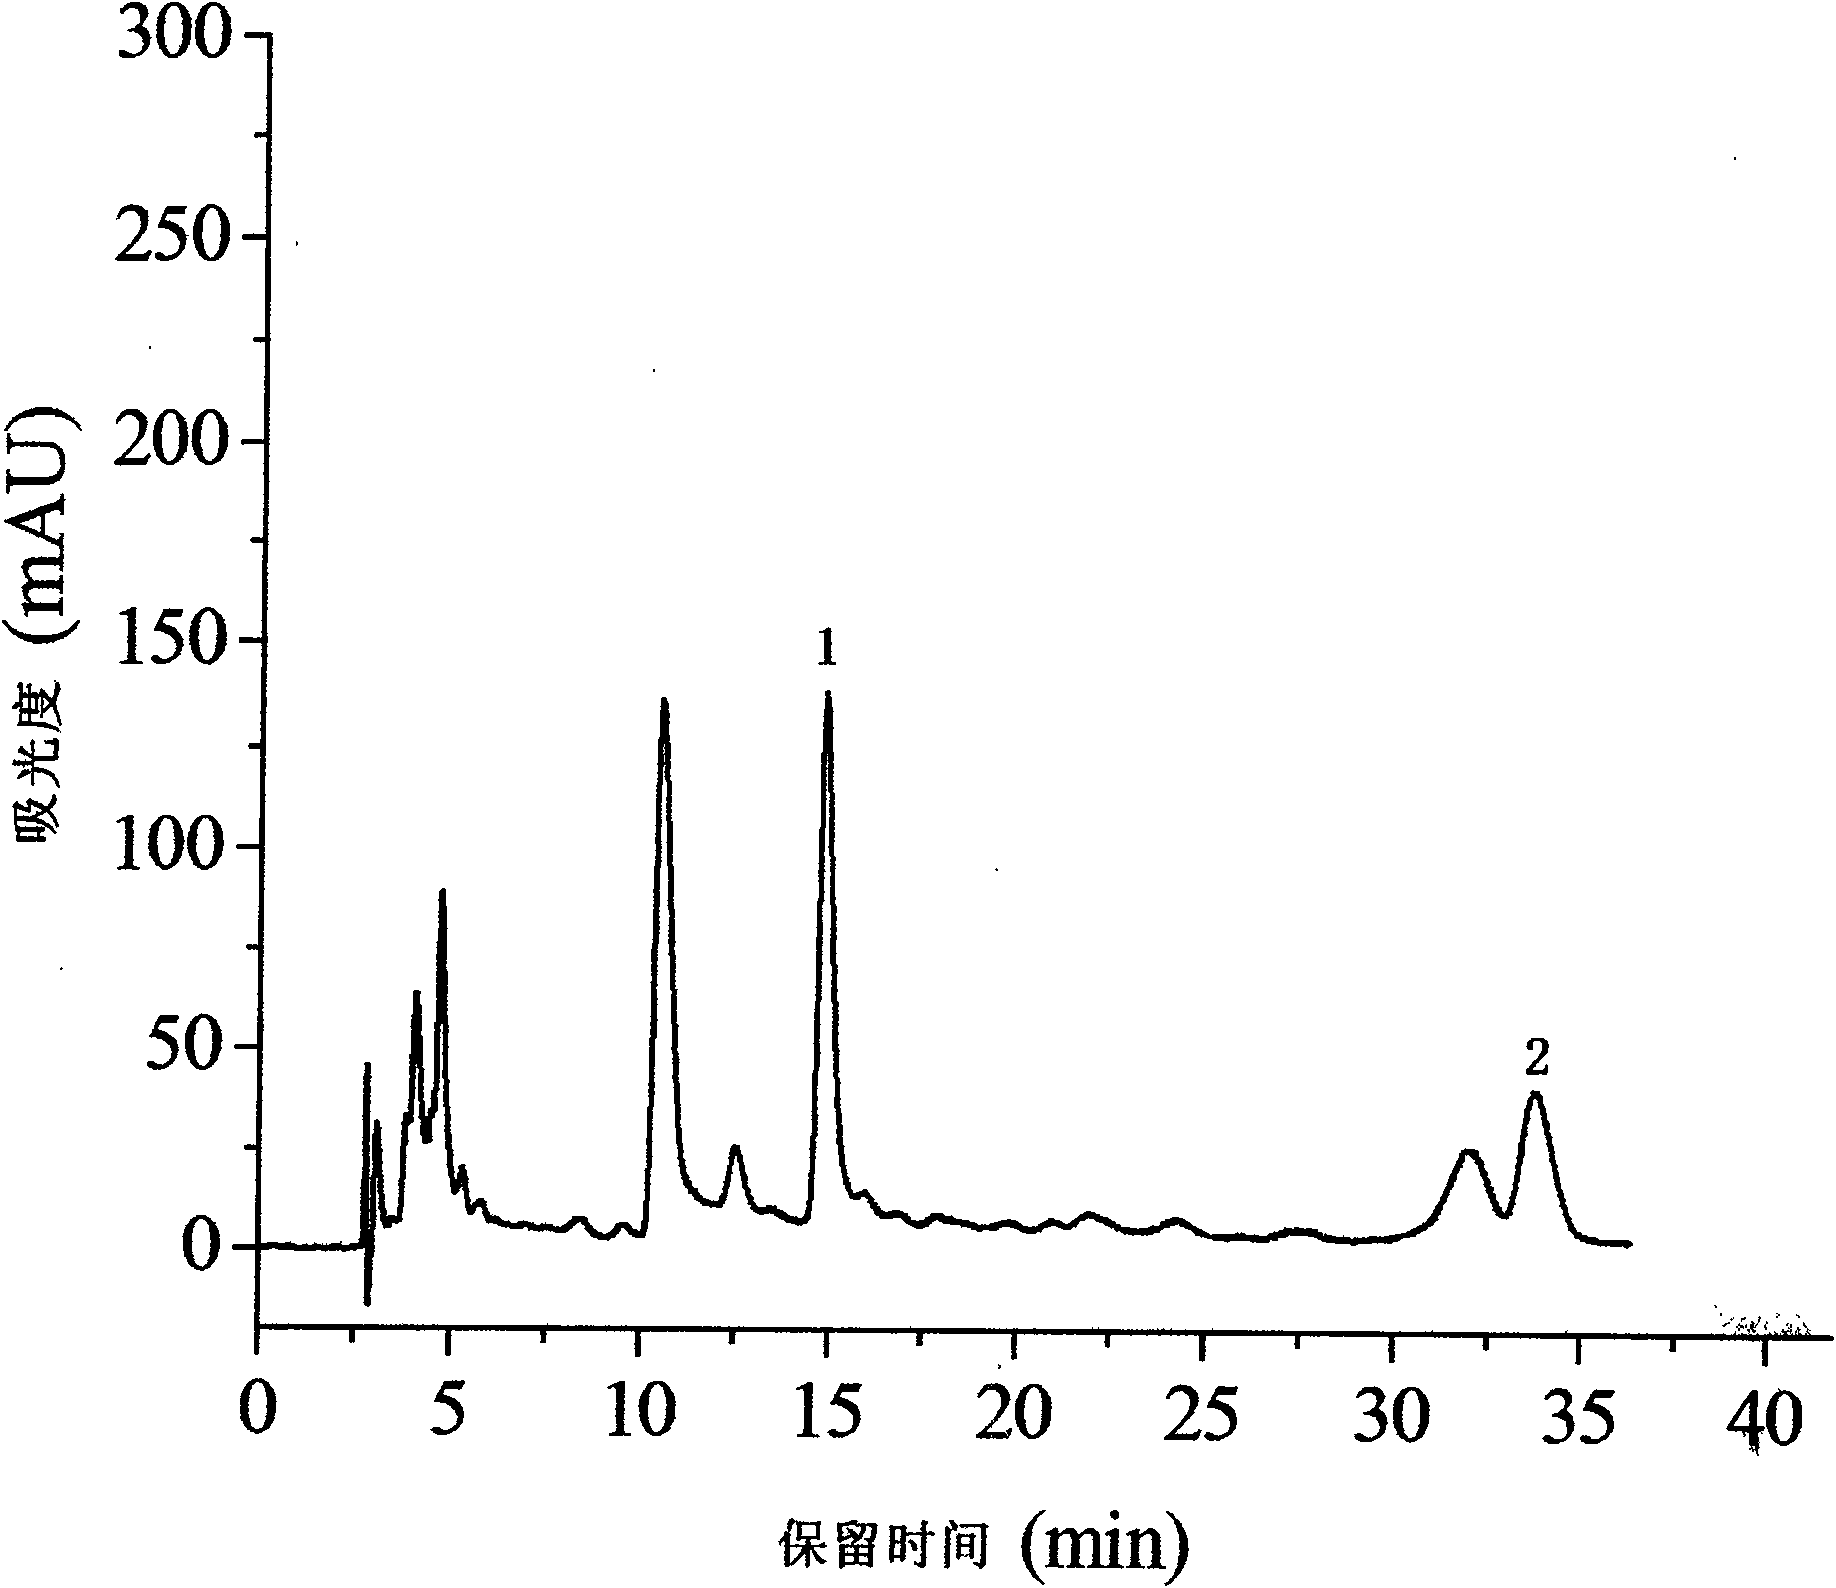 Compound for ultraviolet-detecting anions containing sulfur by ion chromatography post-column derivatization